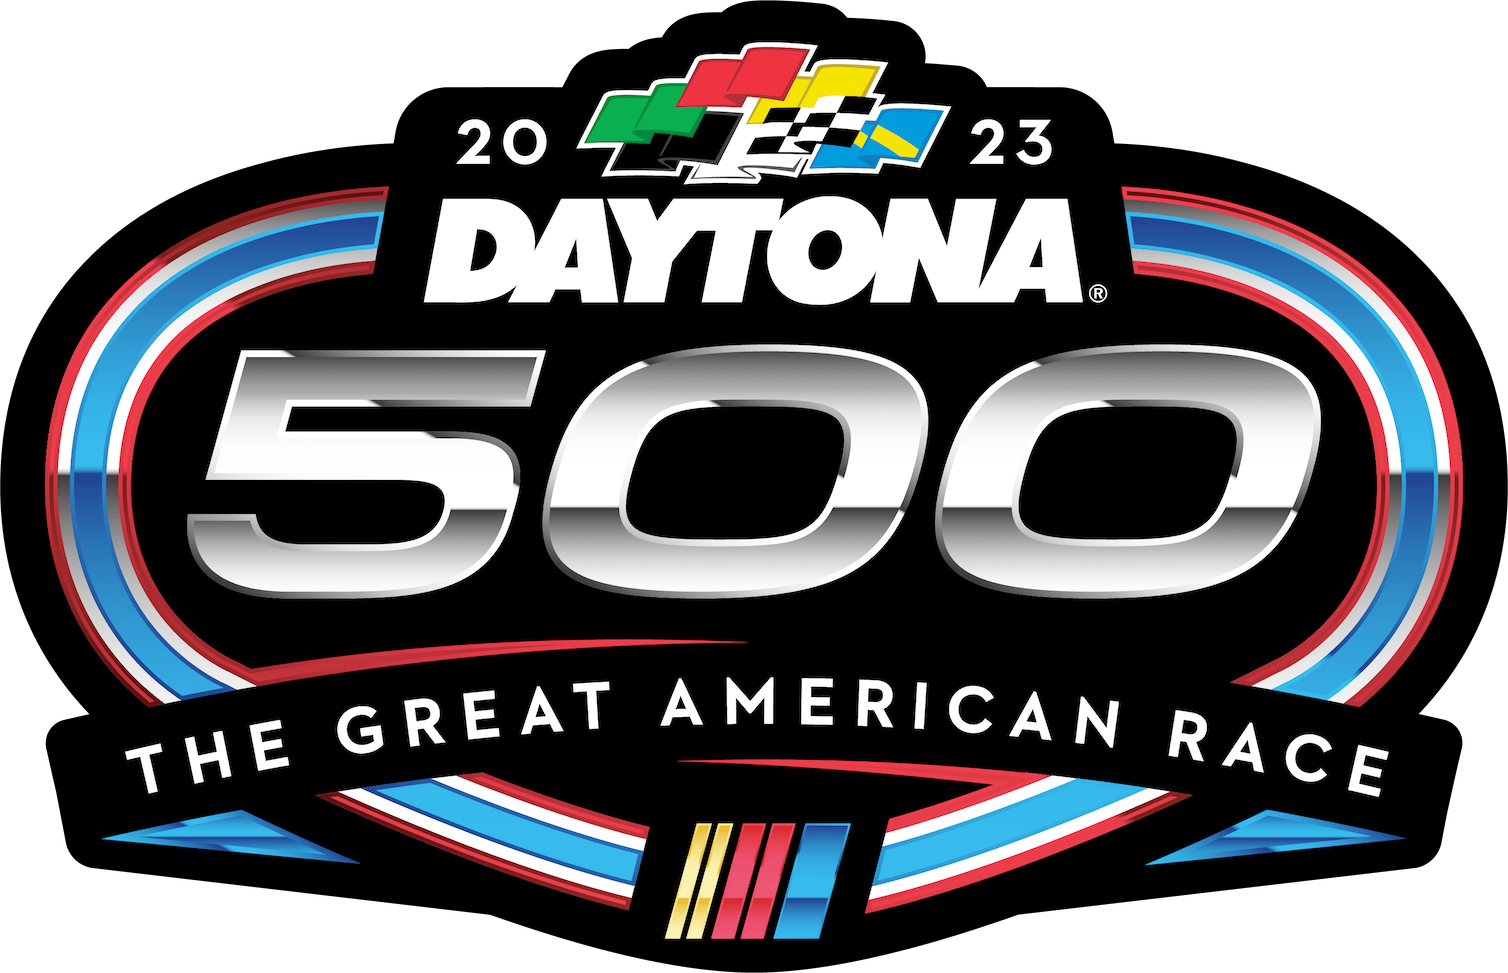 Daytona 500 live stream 2023 how to watch NASCAR online from anywhere today, weather conditions TechRadar